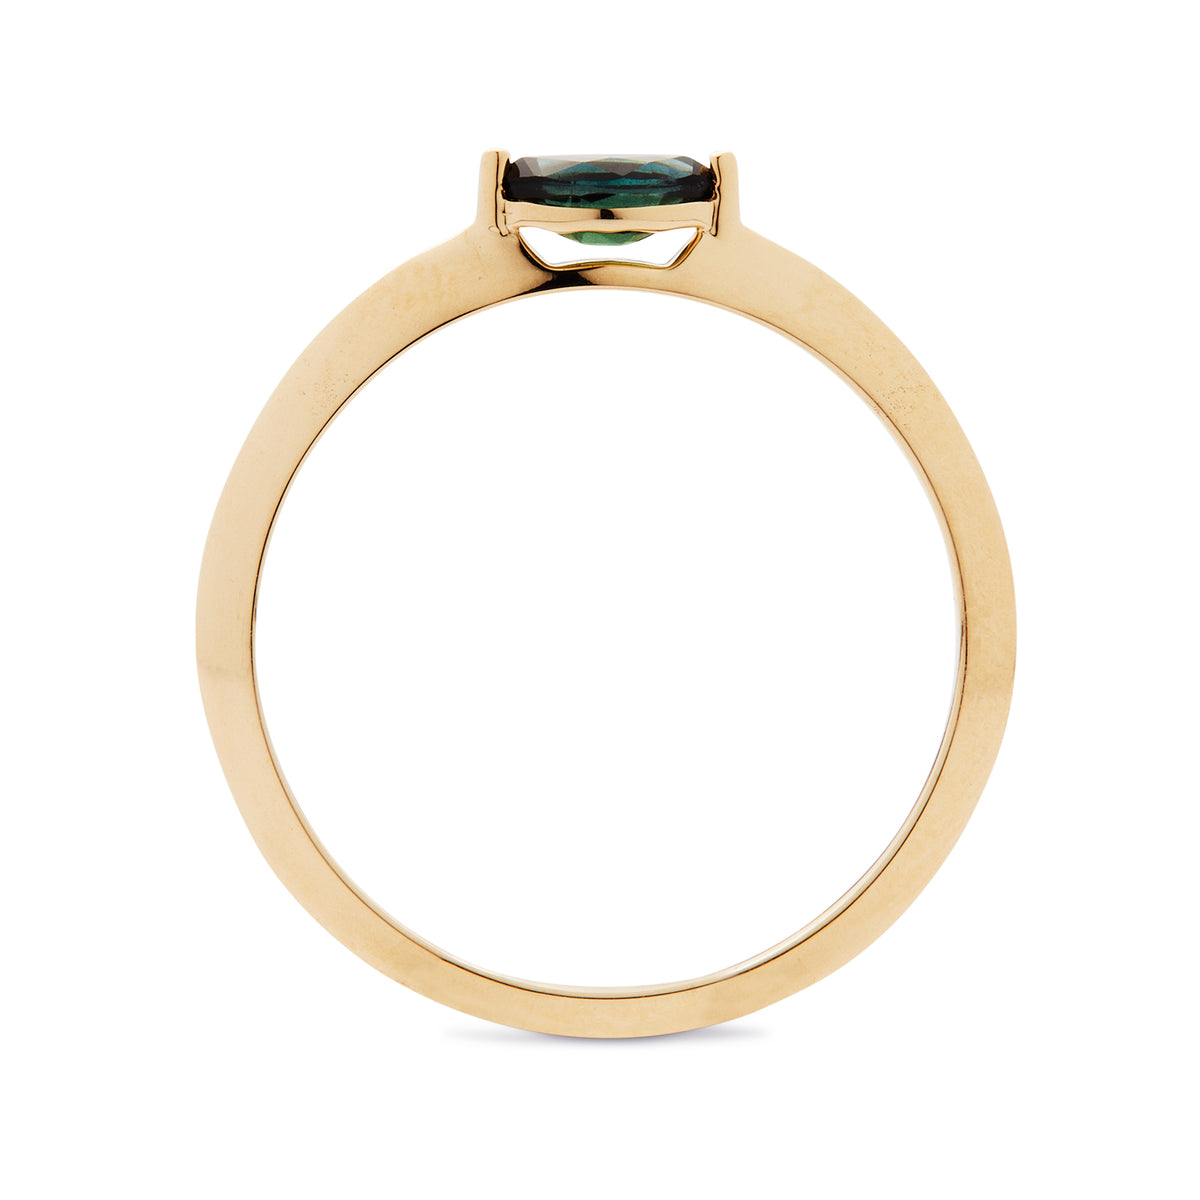 Flora Ring from a side angle, showcasing a polished 14K yellow gold band with a marquise Australian Sapphire.